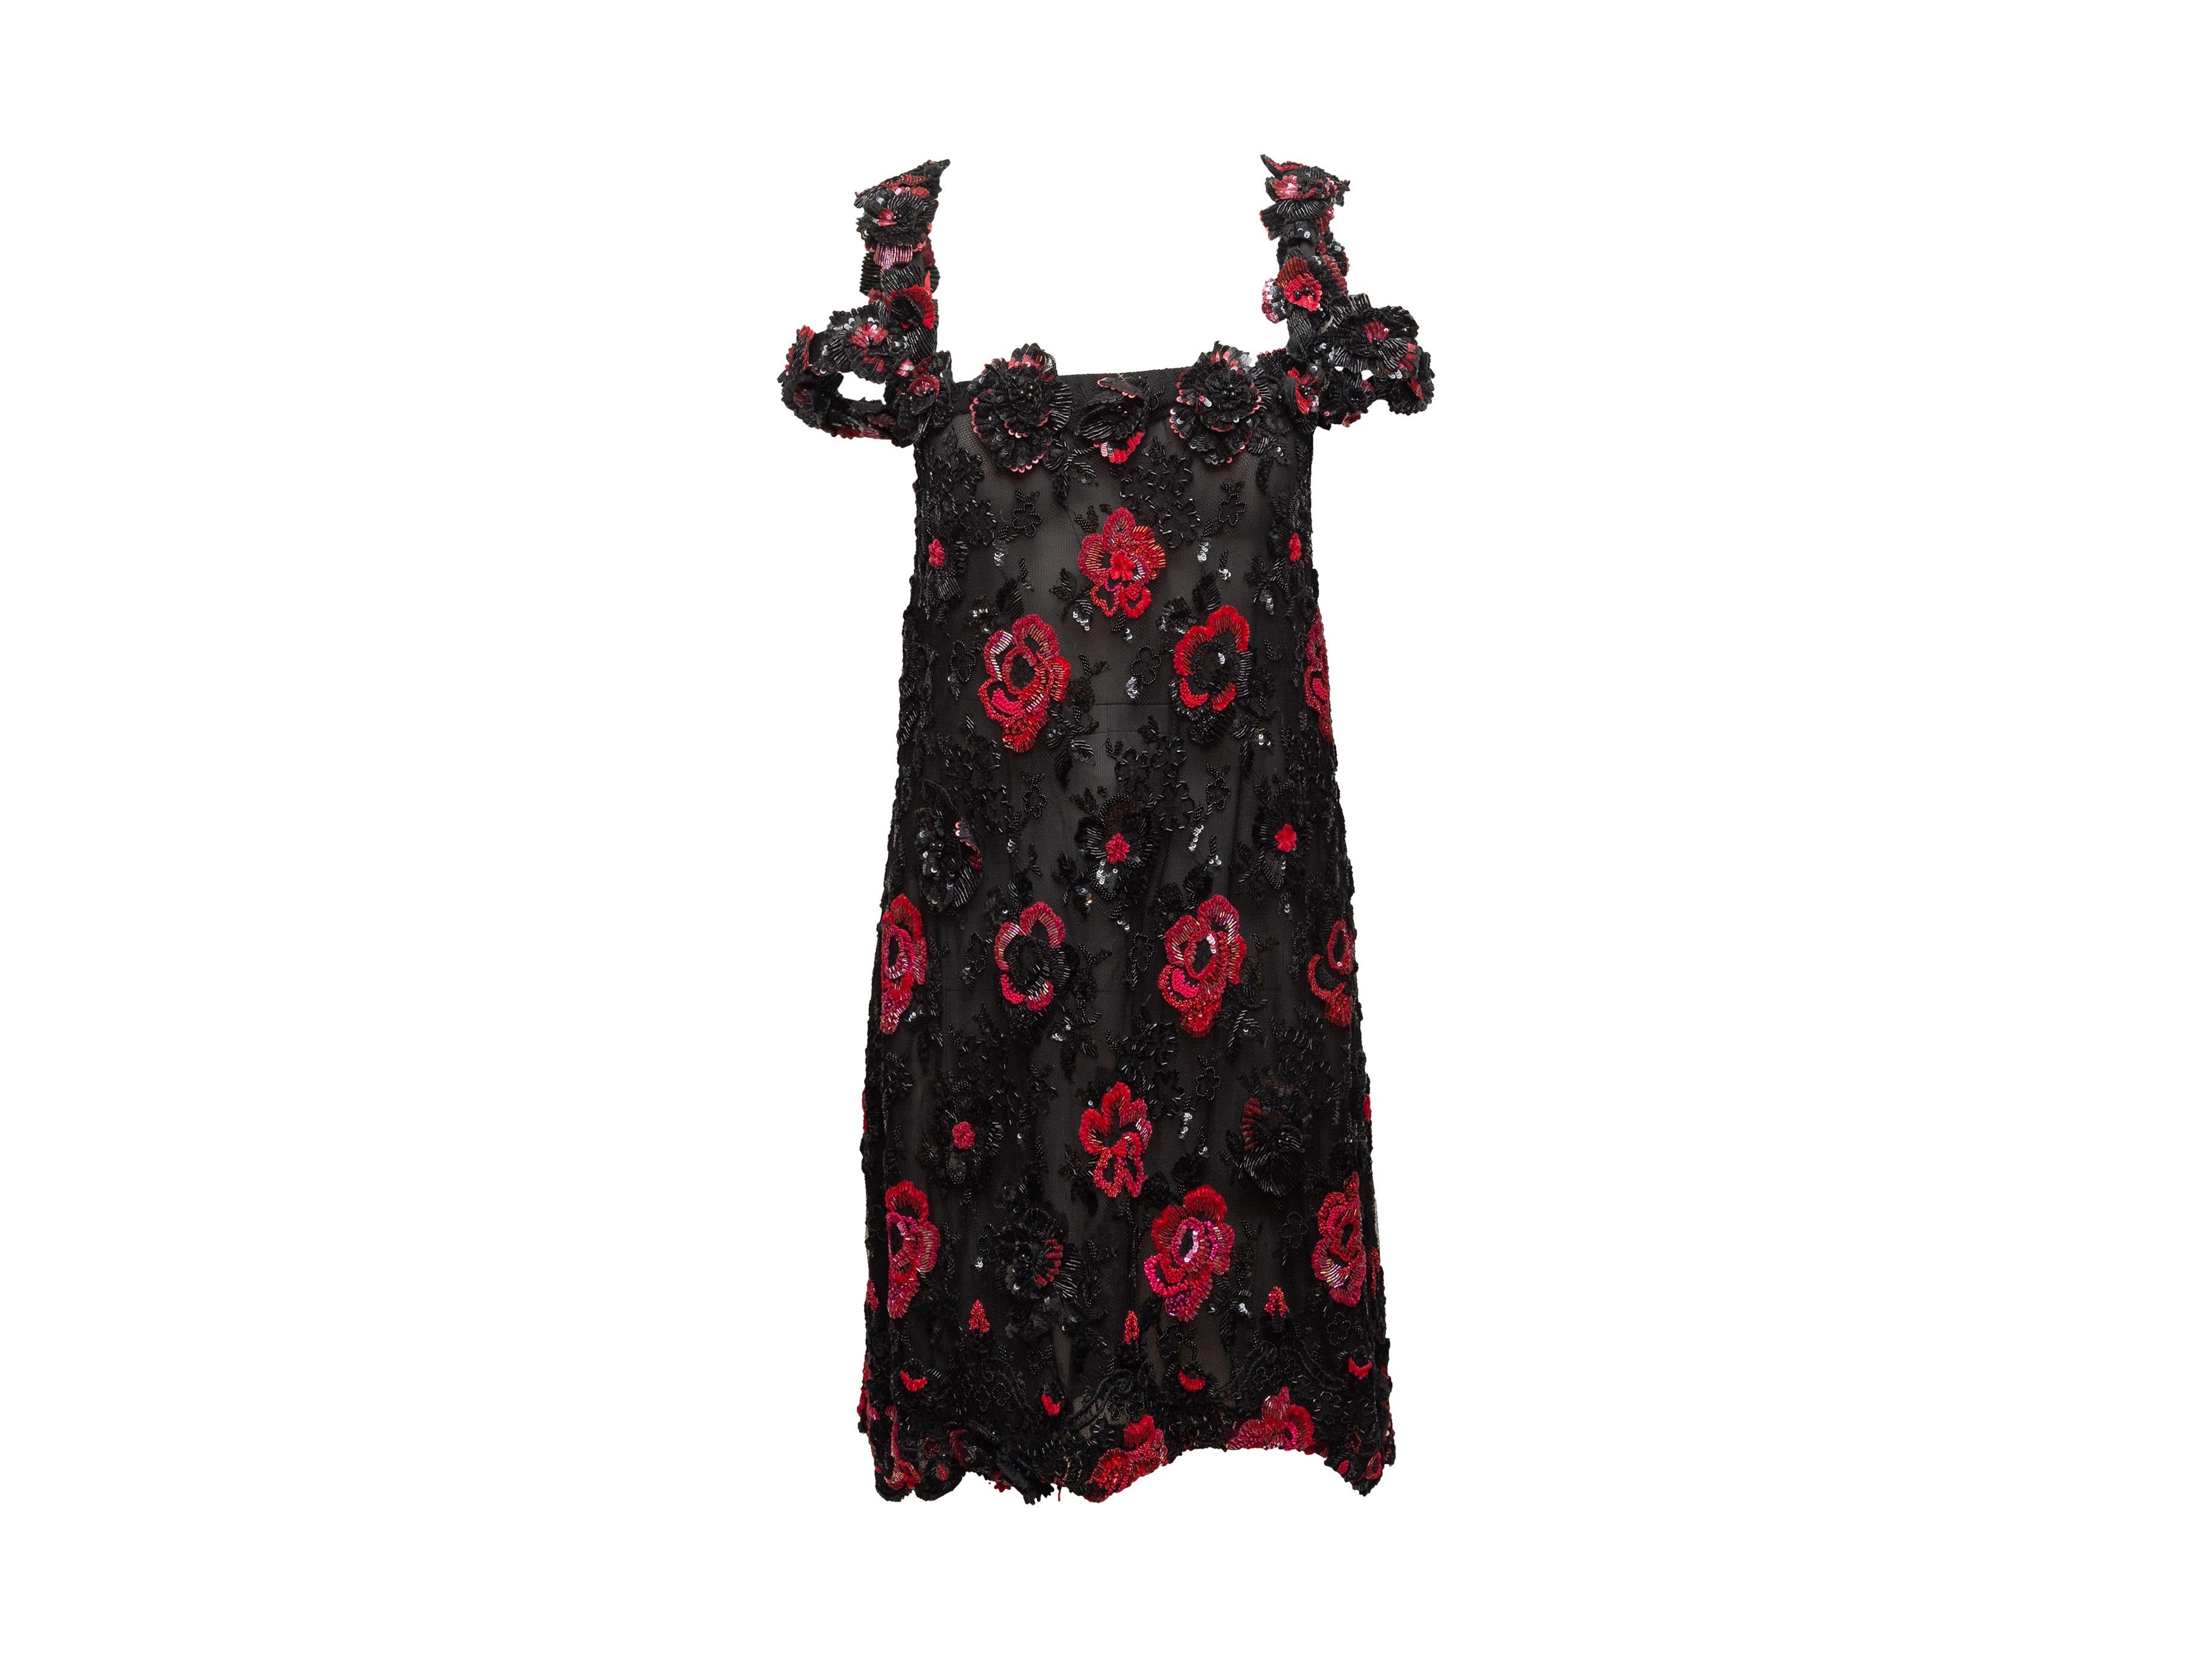 Product details: Black and red beaded floral patterned cocktail dress by Christian Dior Boutique. Sleeveless. Square neckline. 26